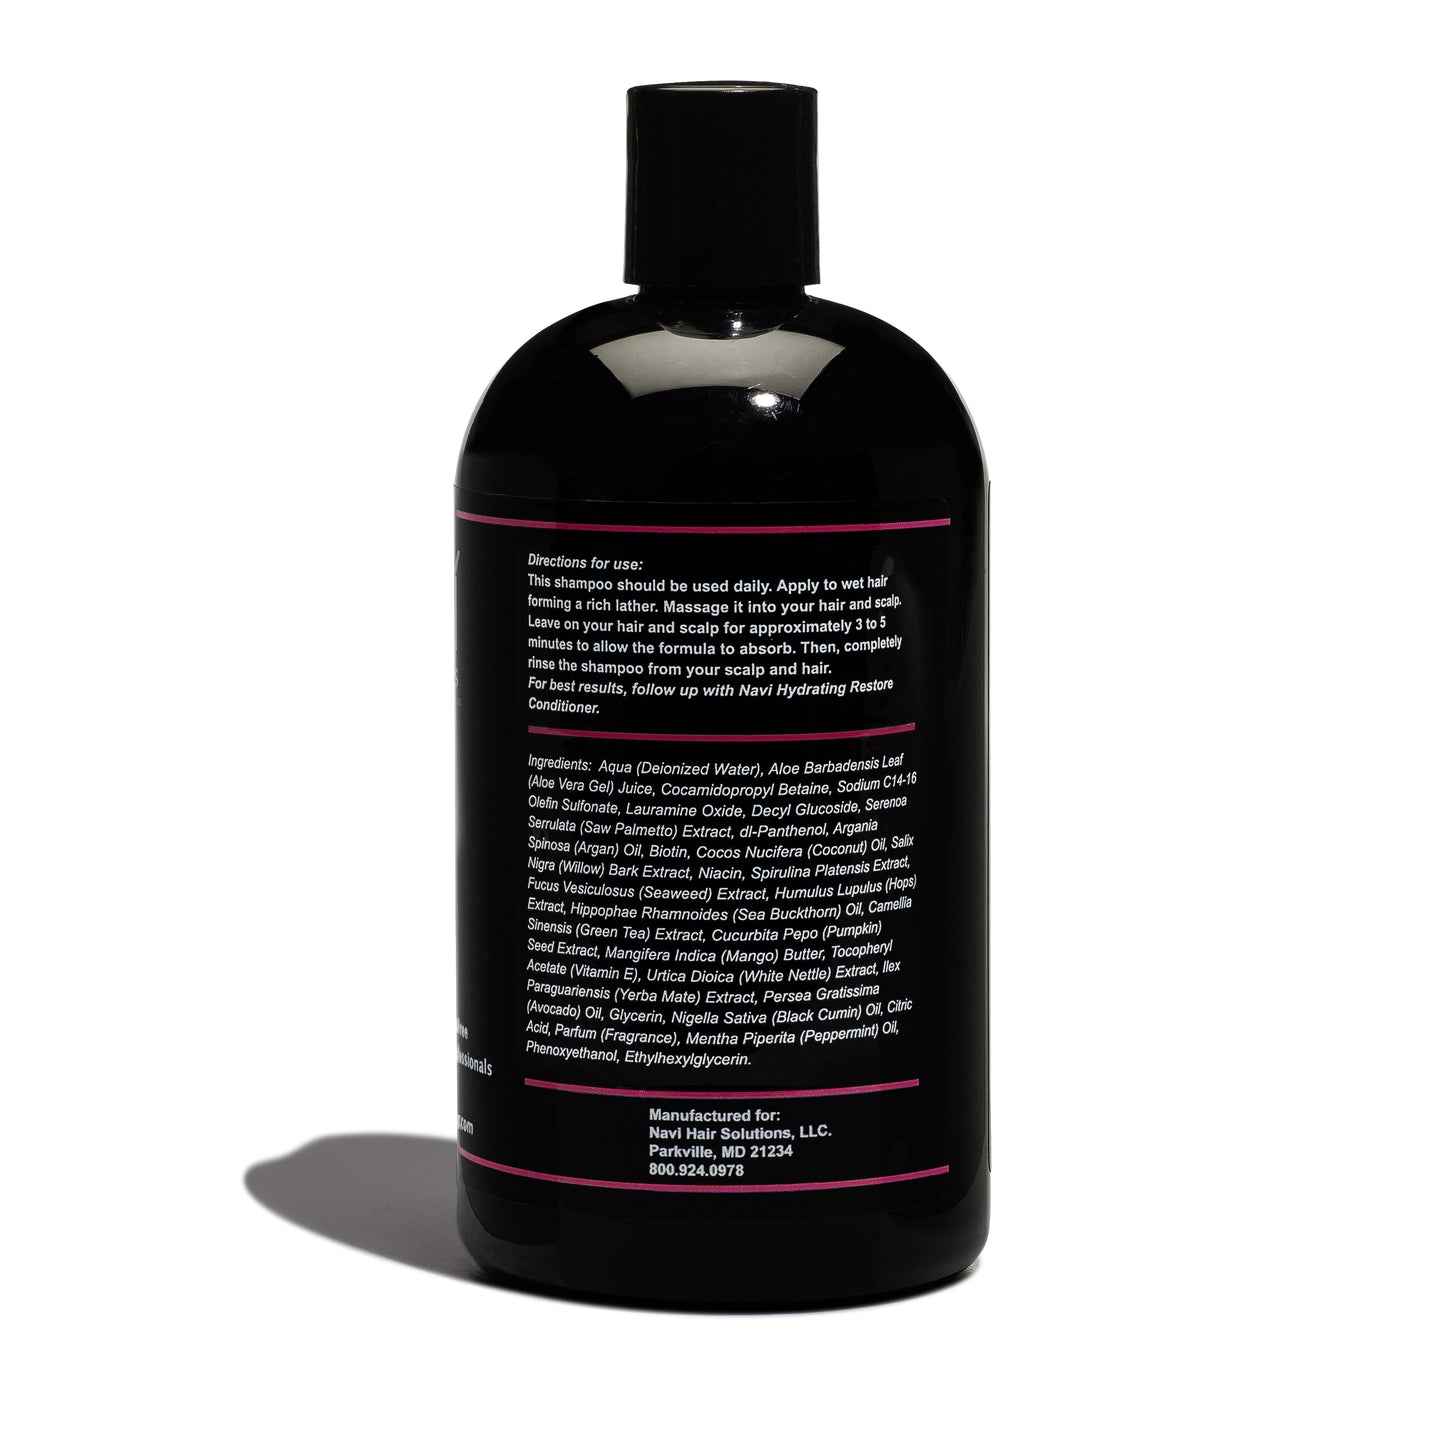 Daily Restore Shampoo with natural DHT Blocking Ingredients to help regrow thicker fuller hair